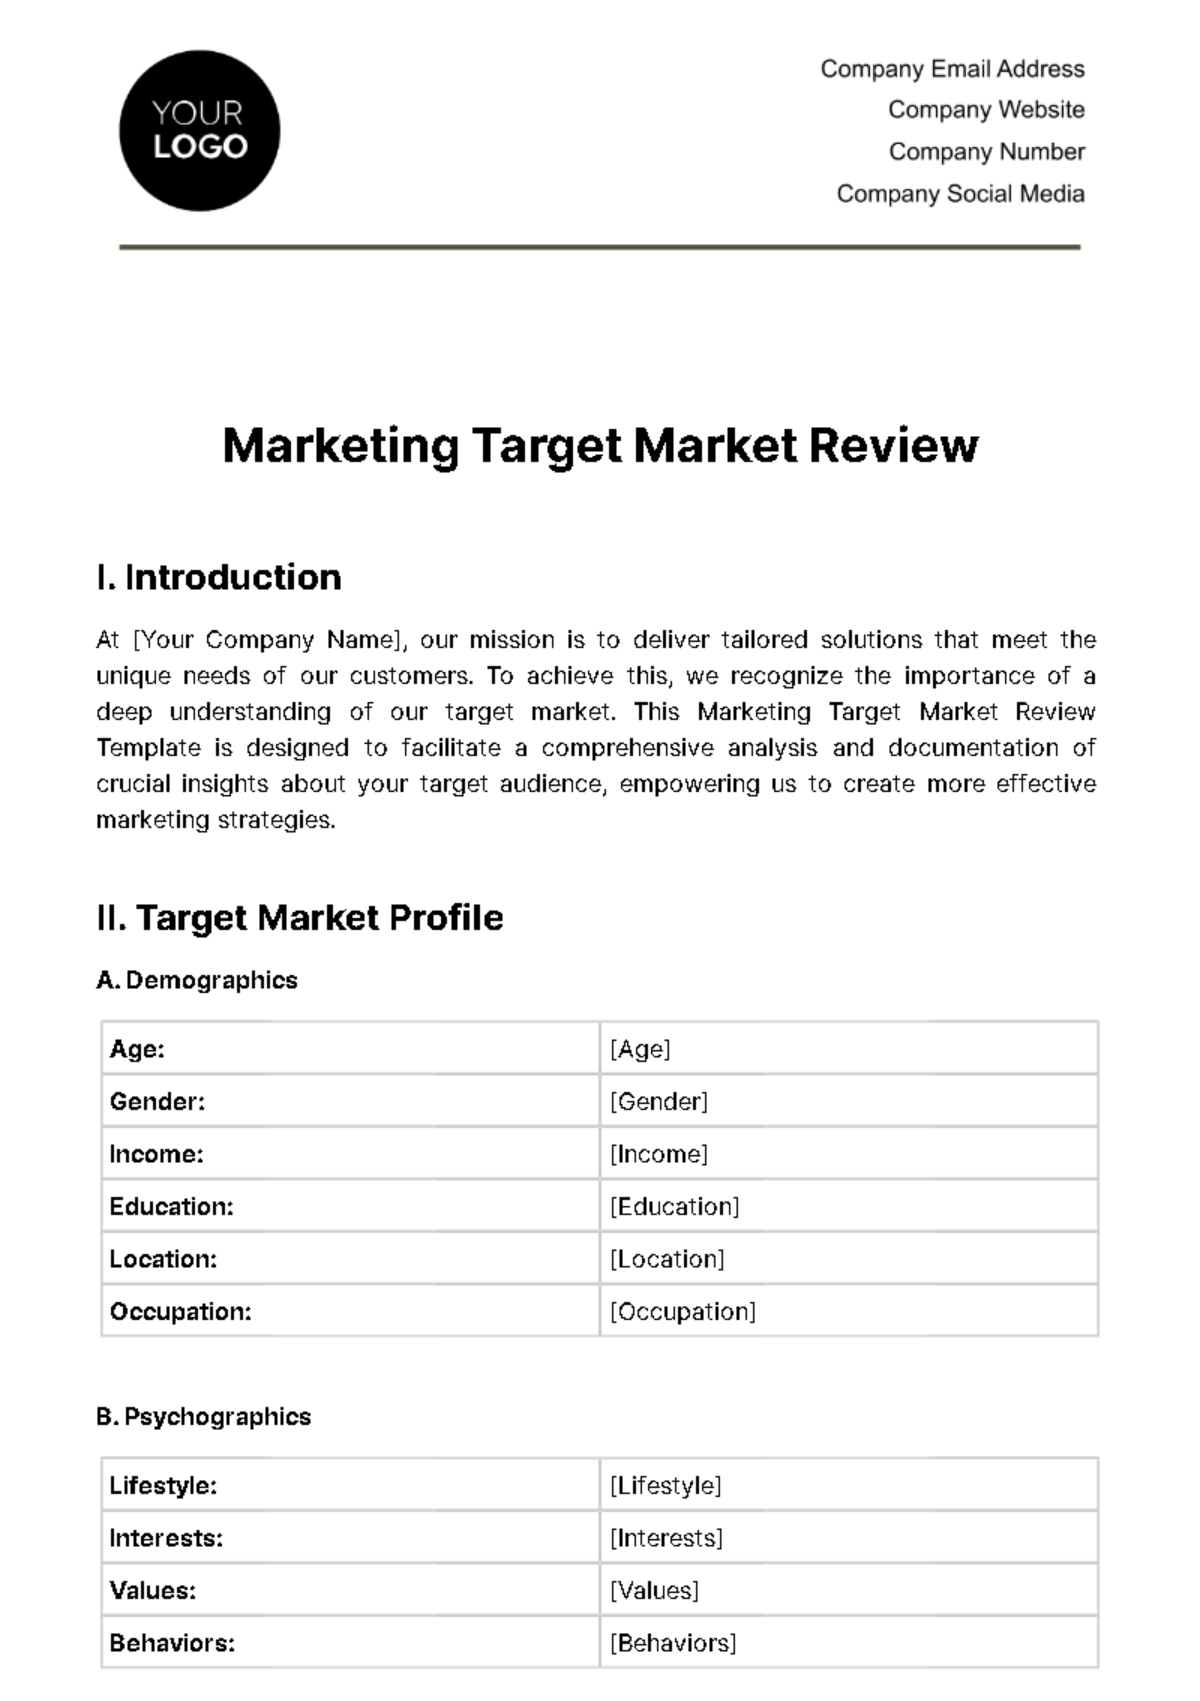 Free Marketing Target Market Review Template